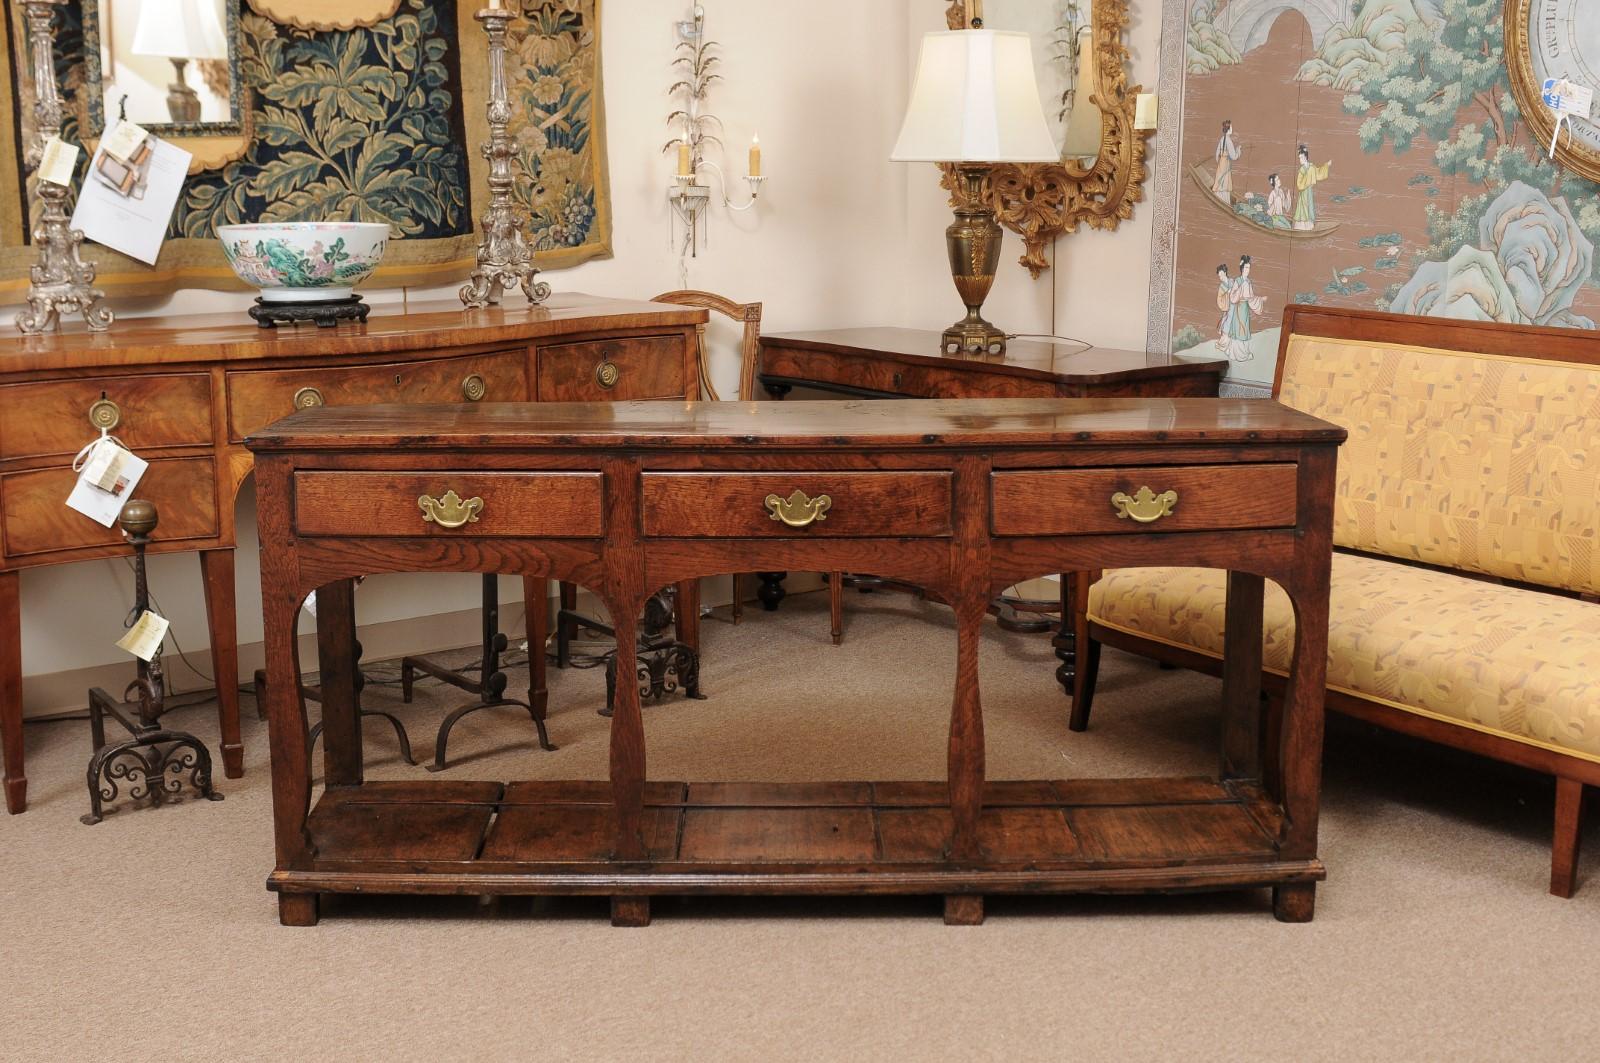 A dresser base/server dating from the 18th century and English in origin. The server constructed in oak with 3 drawers in frieze with 4 shaped front legs and 2 straight back legs joined by plinth base ending in square feet.

  